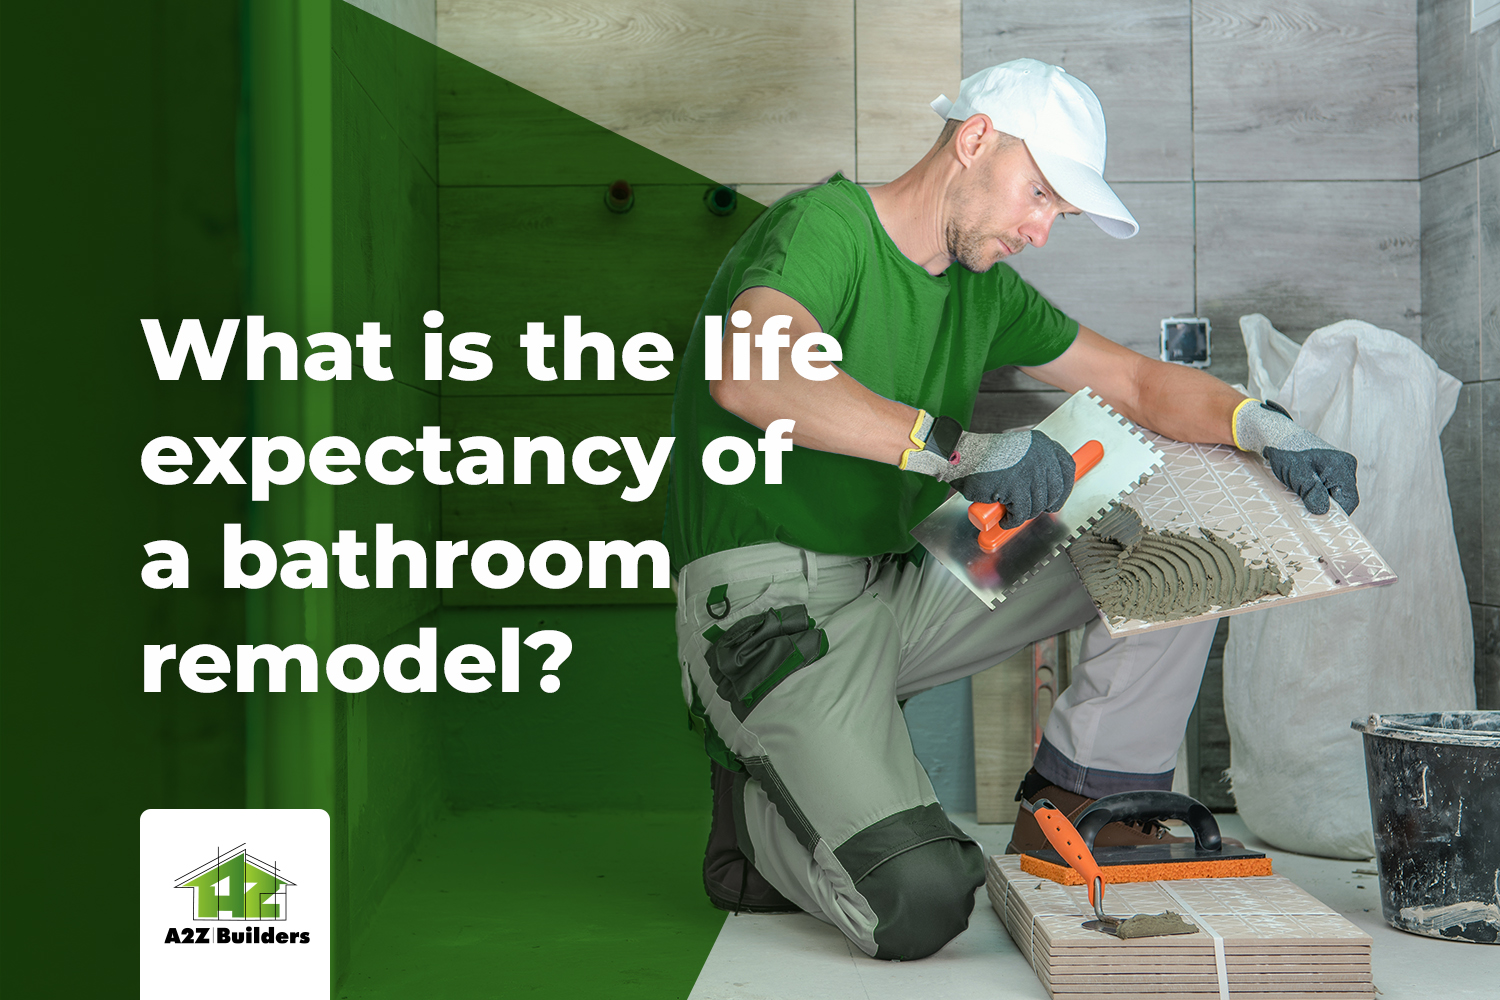 Life expectancy of a bathroom remodel